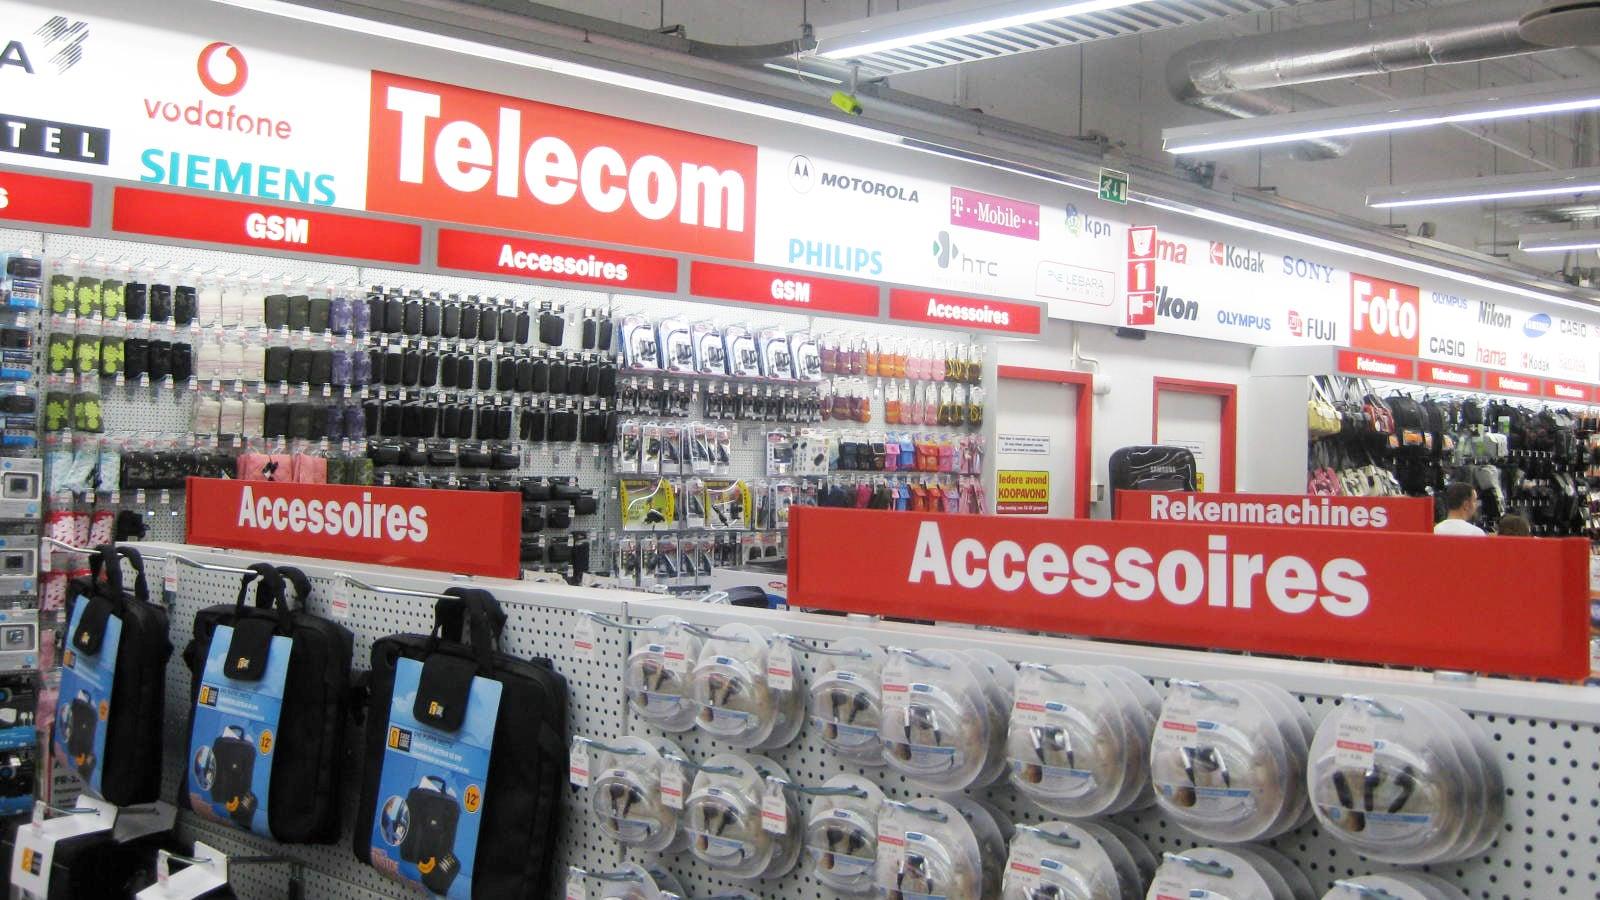 Media Markt increased recycling rates by waste compaction